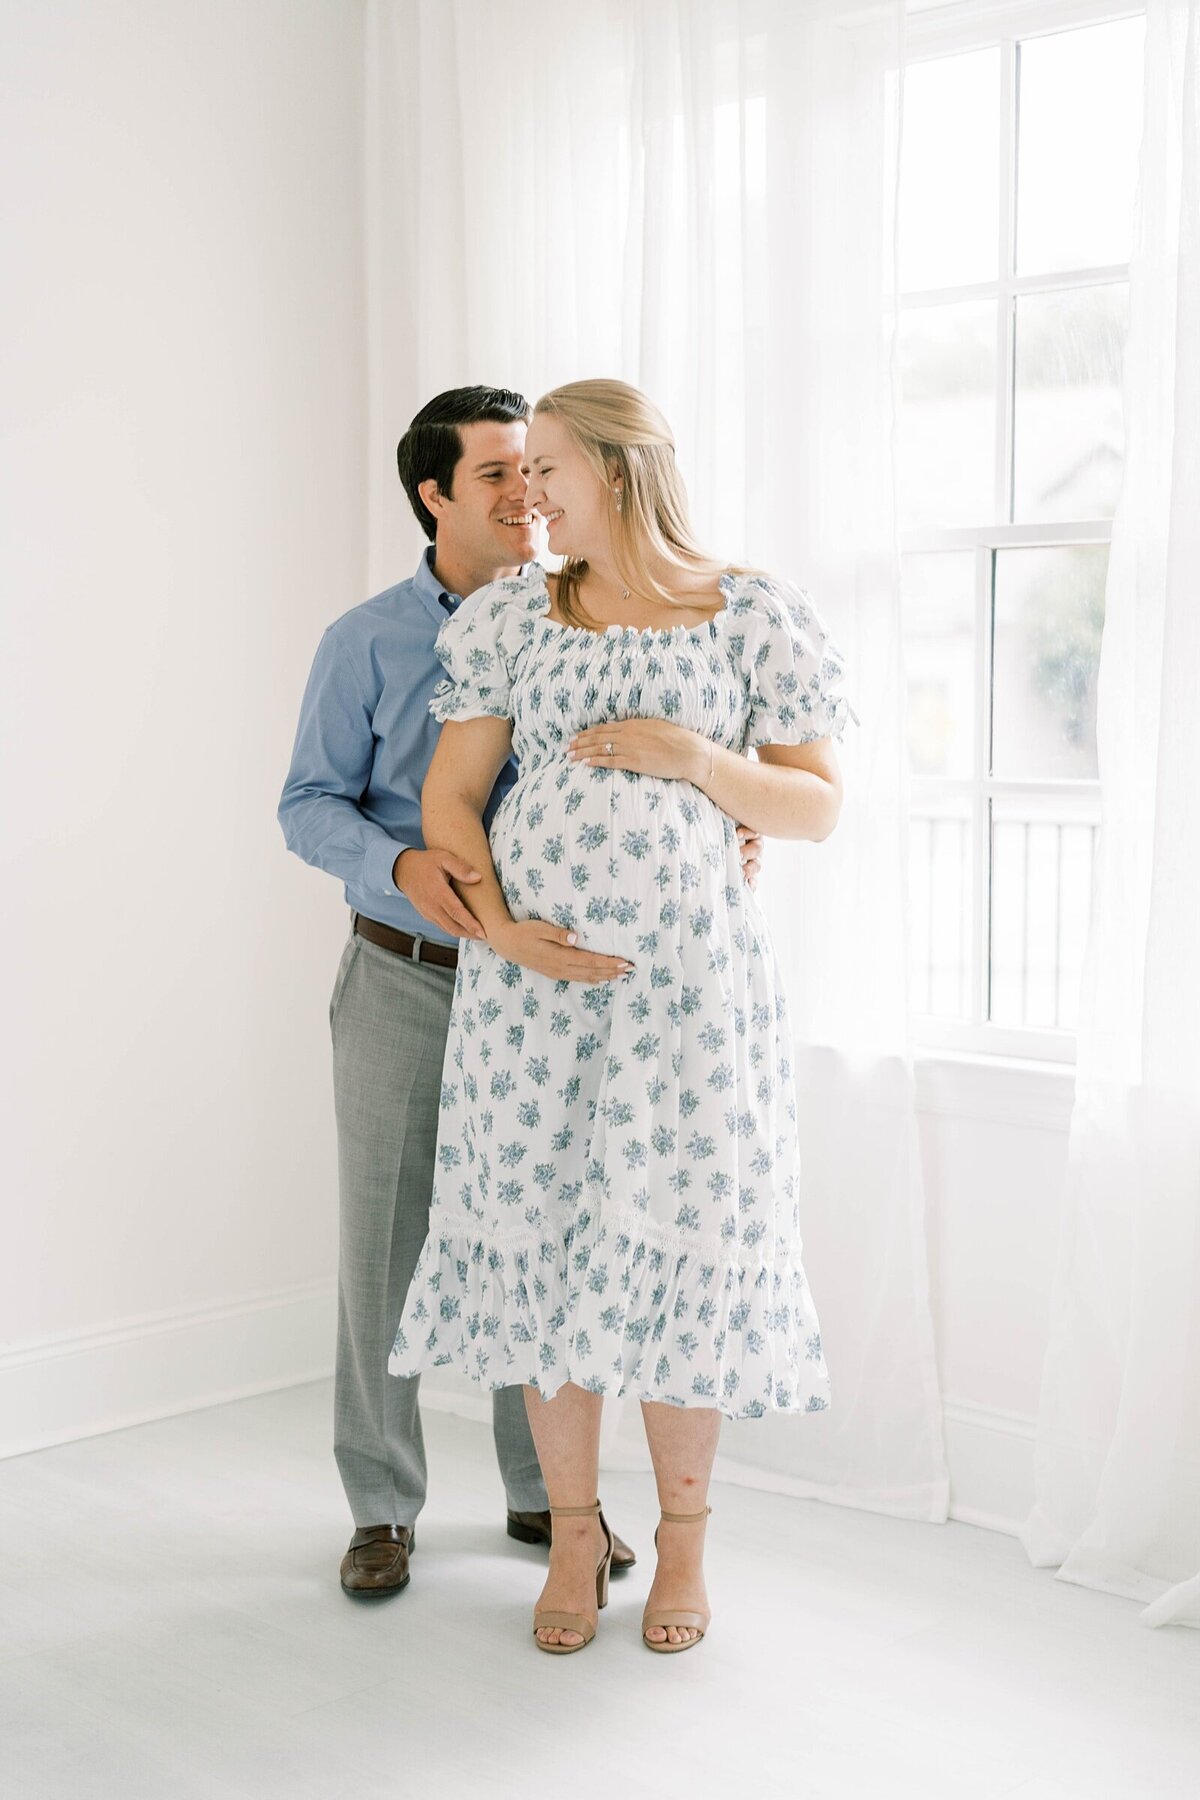 Roswell Maternity Photographer_0073